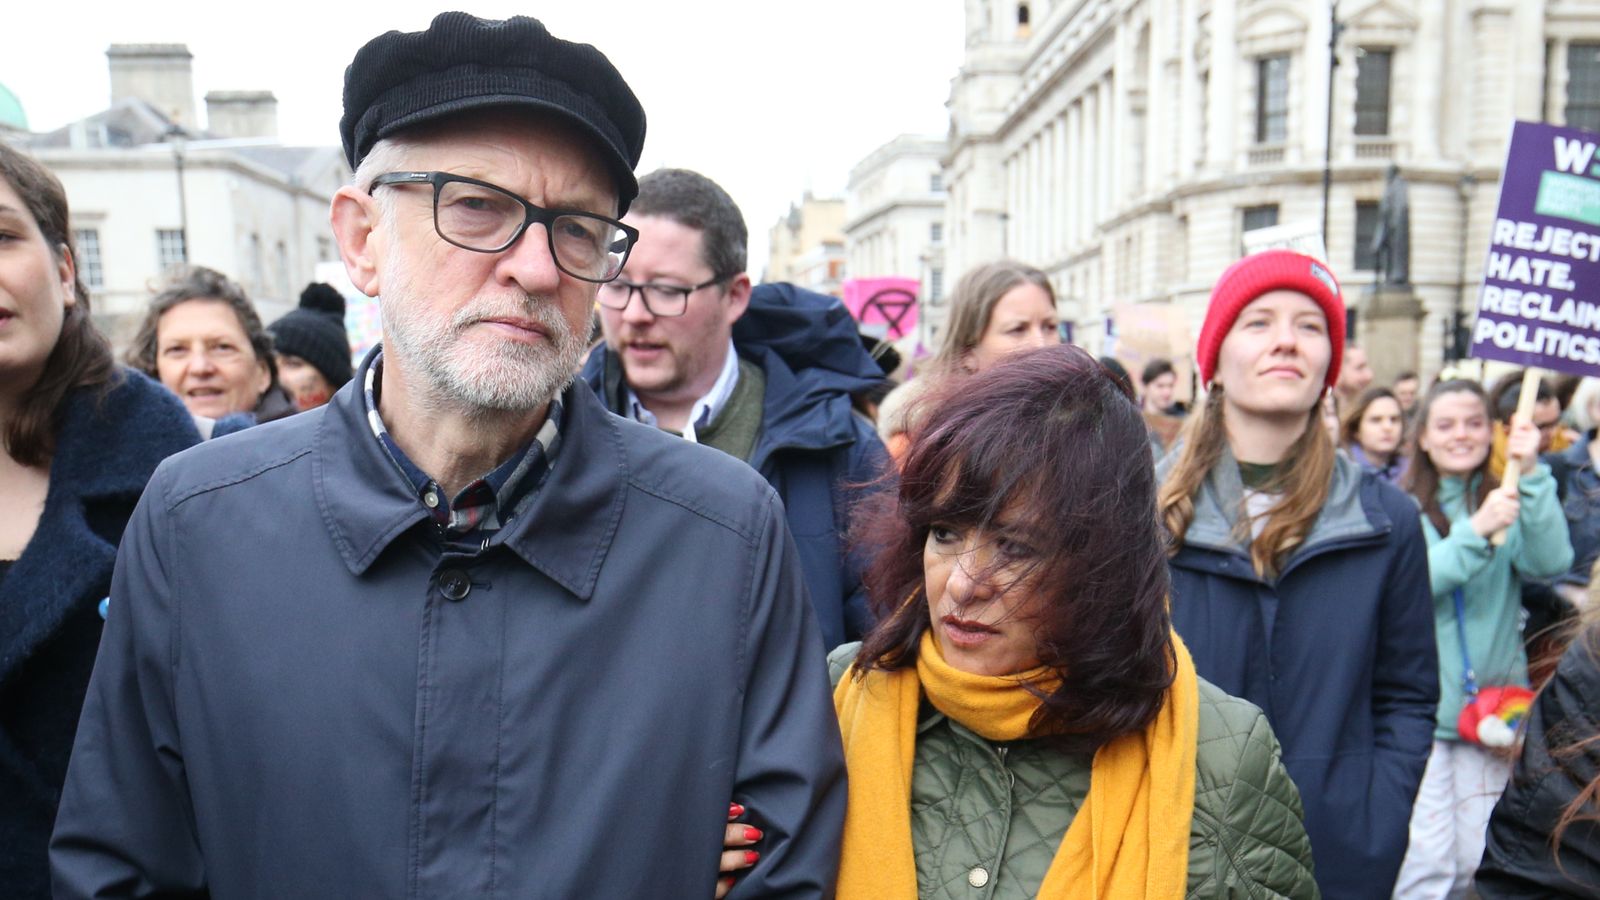 Jeremy Corbyn's wife Laura Alvarez in group aiming to unseat Sir Keir Starmer at next election